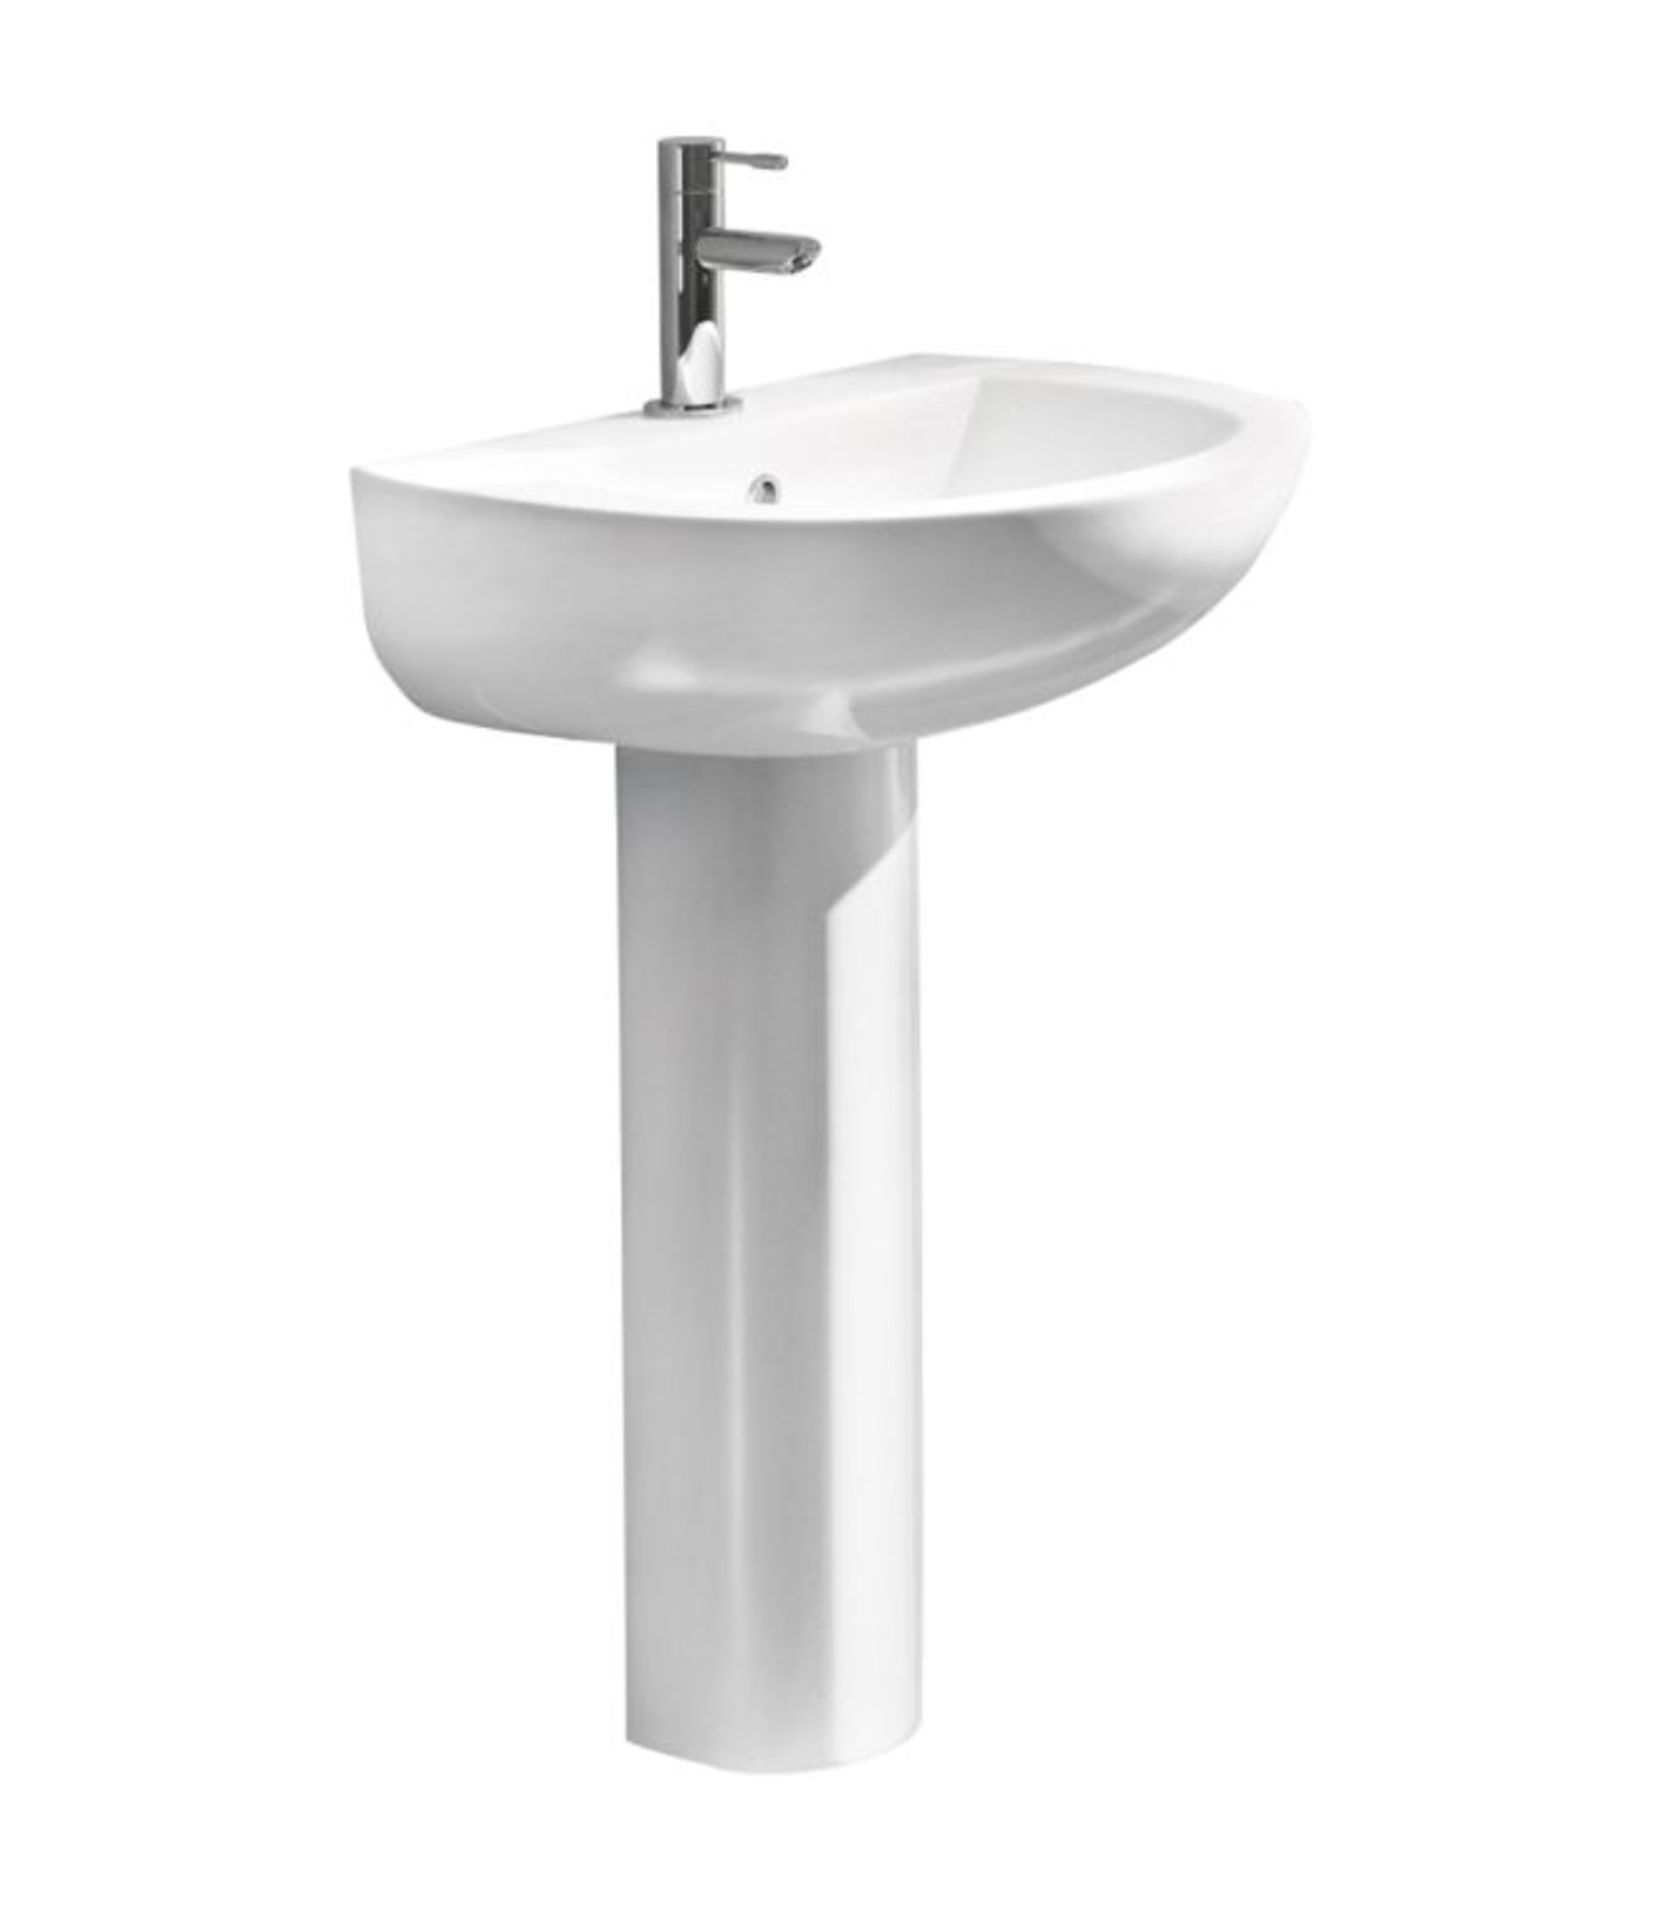 Arley 23702-D 1 Tap Hole 545mm Basin & Pedestal In A Box - Image 2 of 9